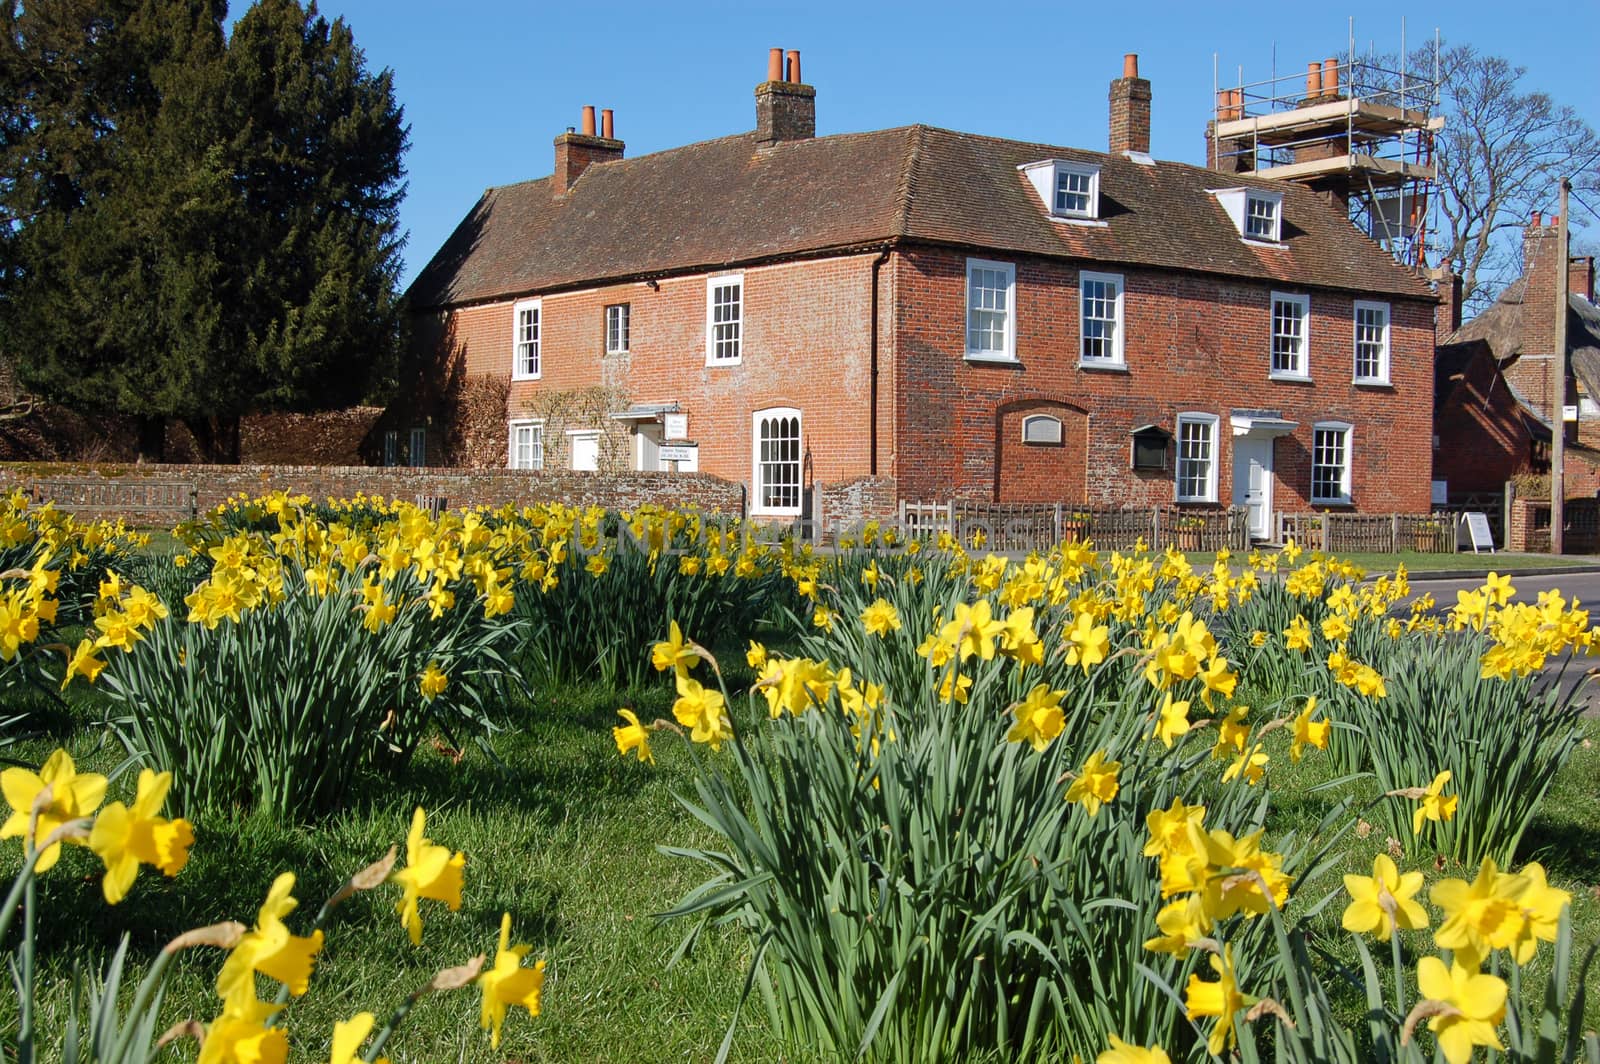 View of the historic home of the novelist Jane Austen in the village of Chawton in Hampshire.  The author wrote some of her famous books while living in this quiet village near Alton.